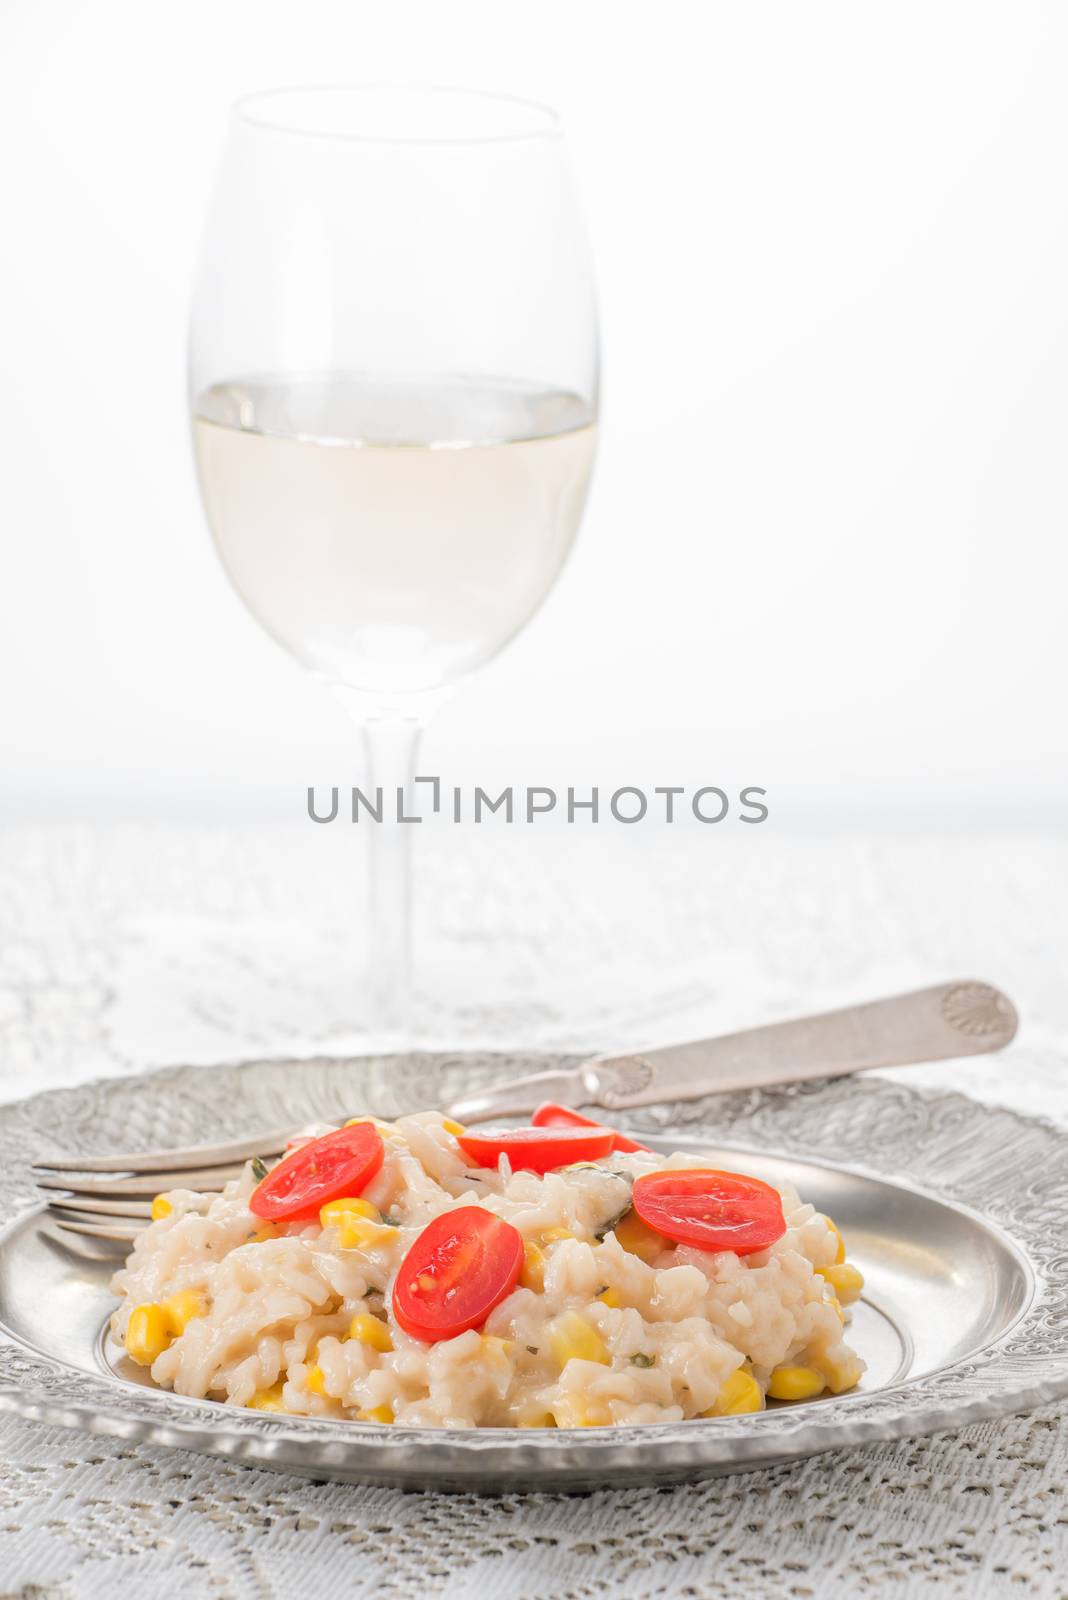 Risotto Portrait by billberryphotography